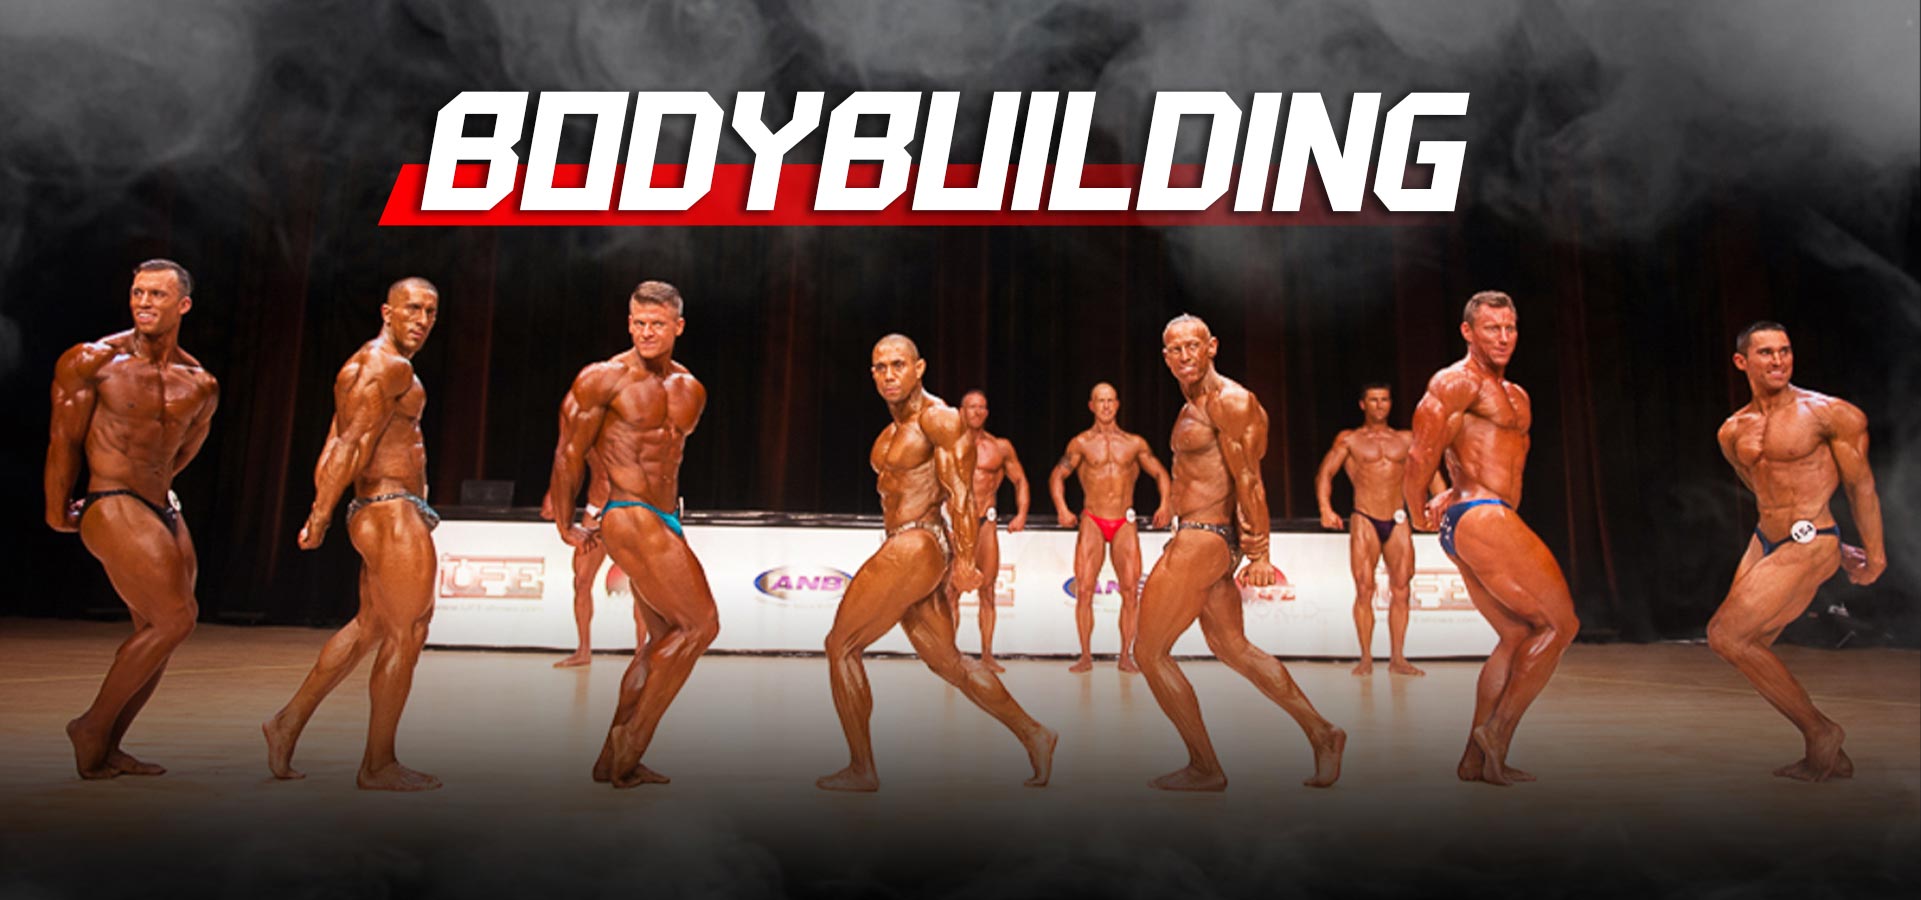 The 6 Major Bodybuilding Competitions & Divisions Explained - SET FOR SET